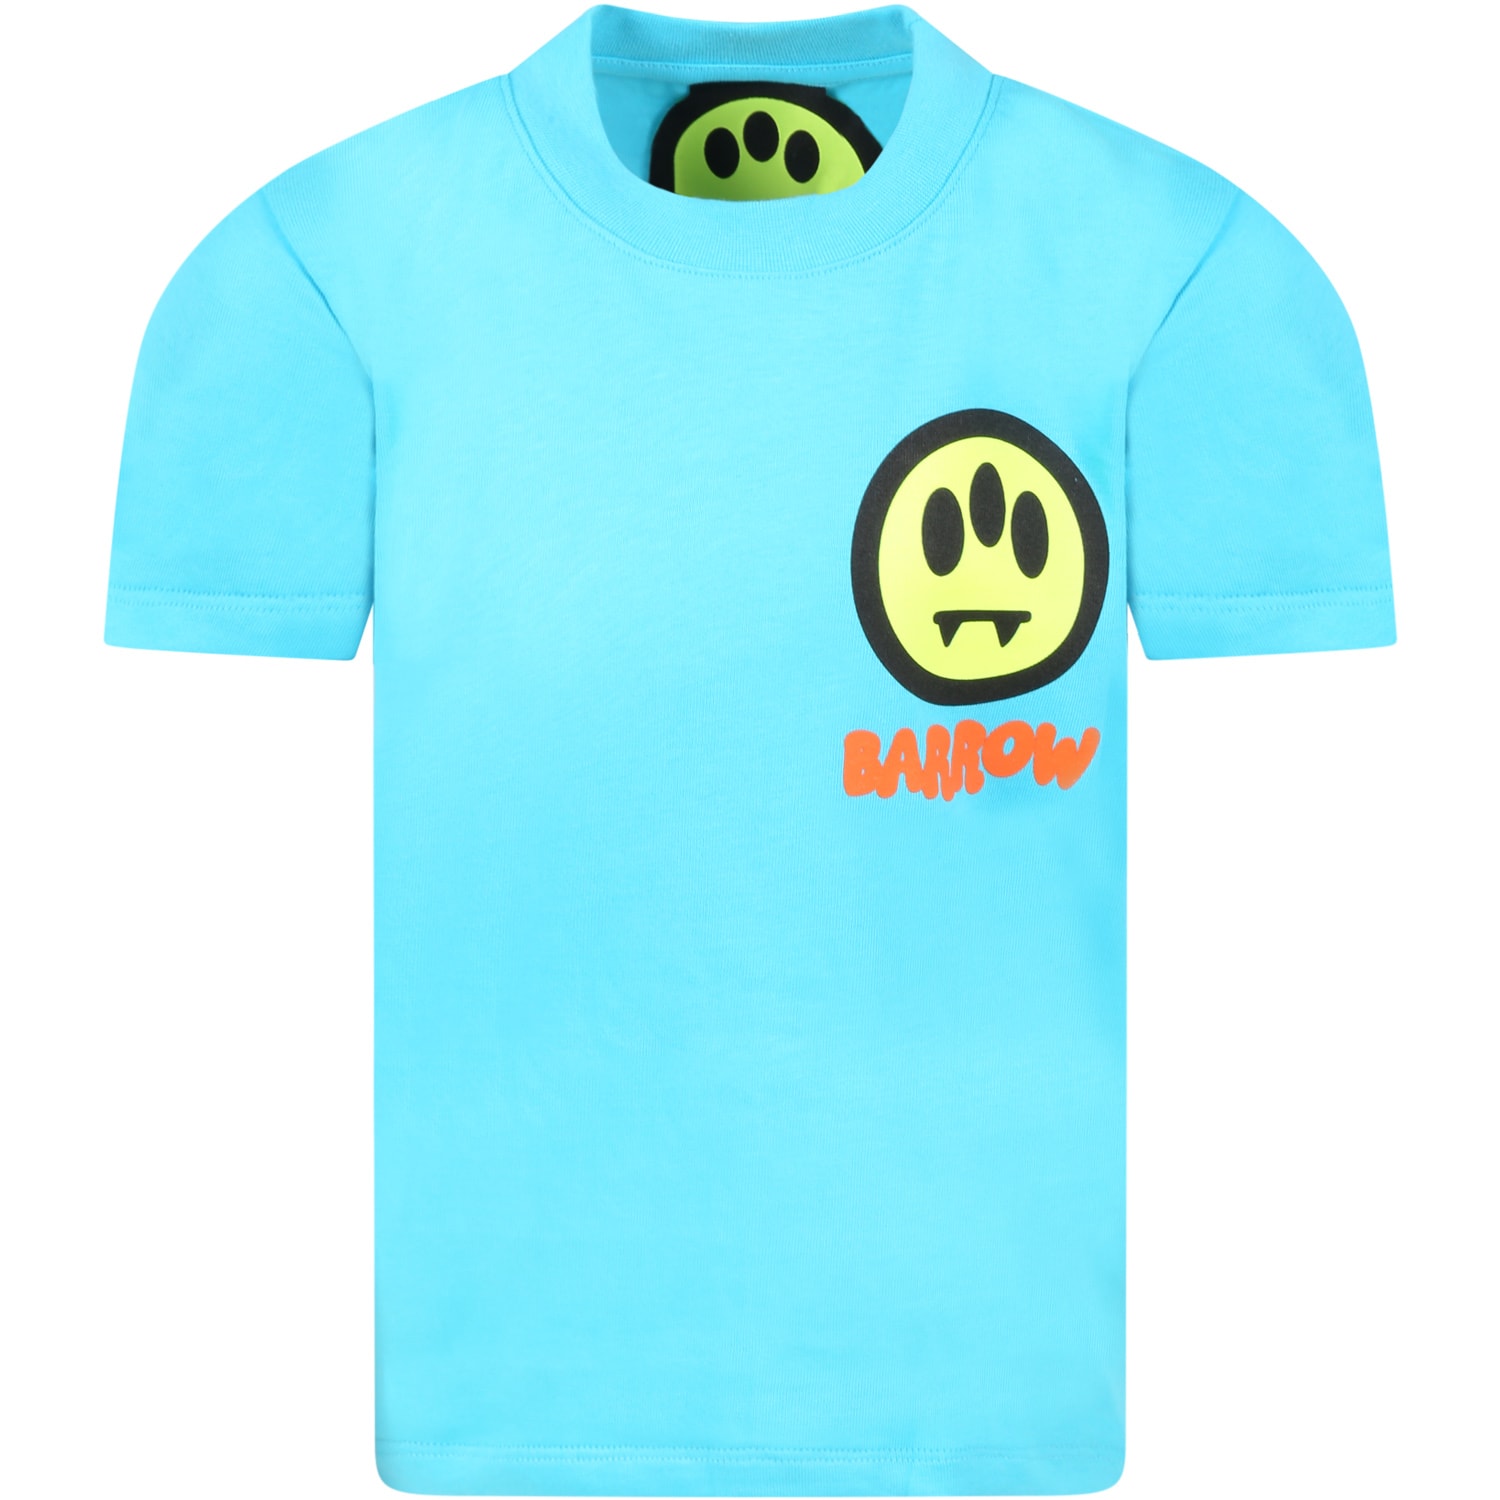 Barrow Light-blue T-shirt For Kids With Iconic Smiley And Logo